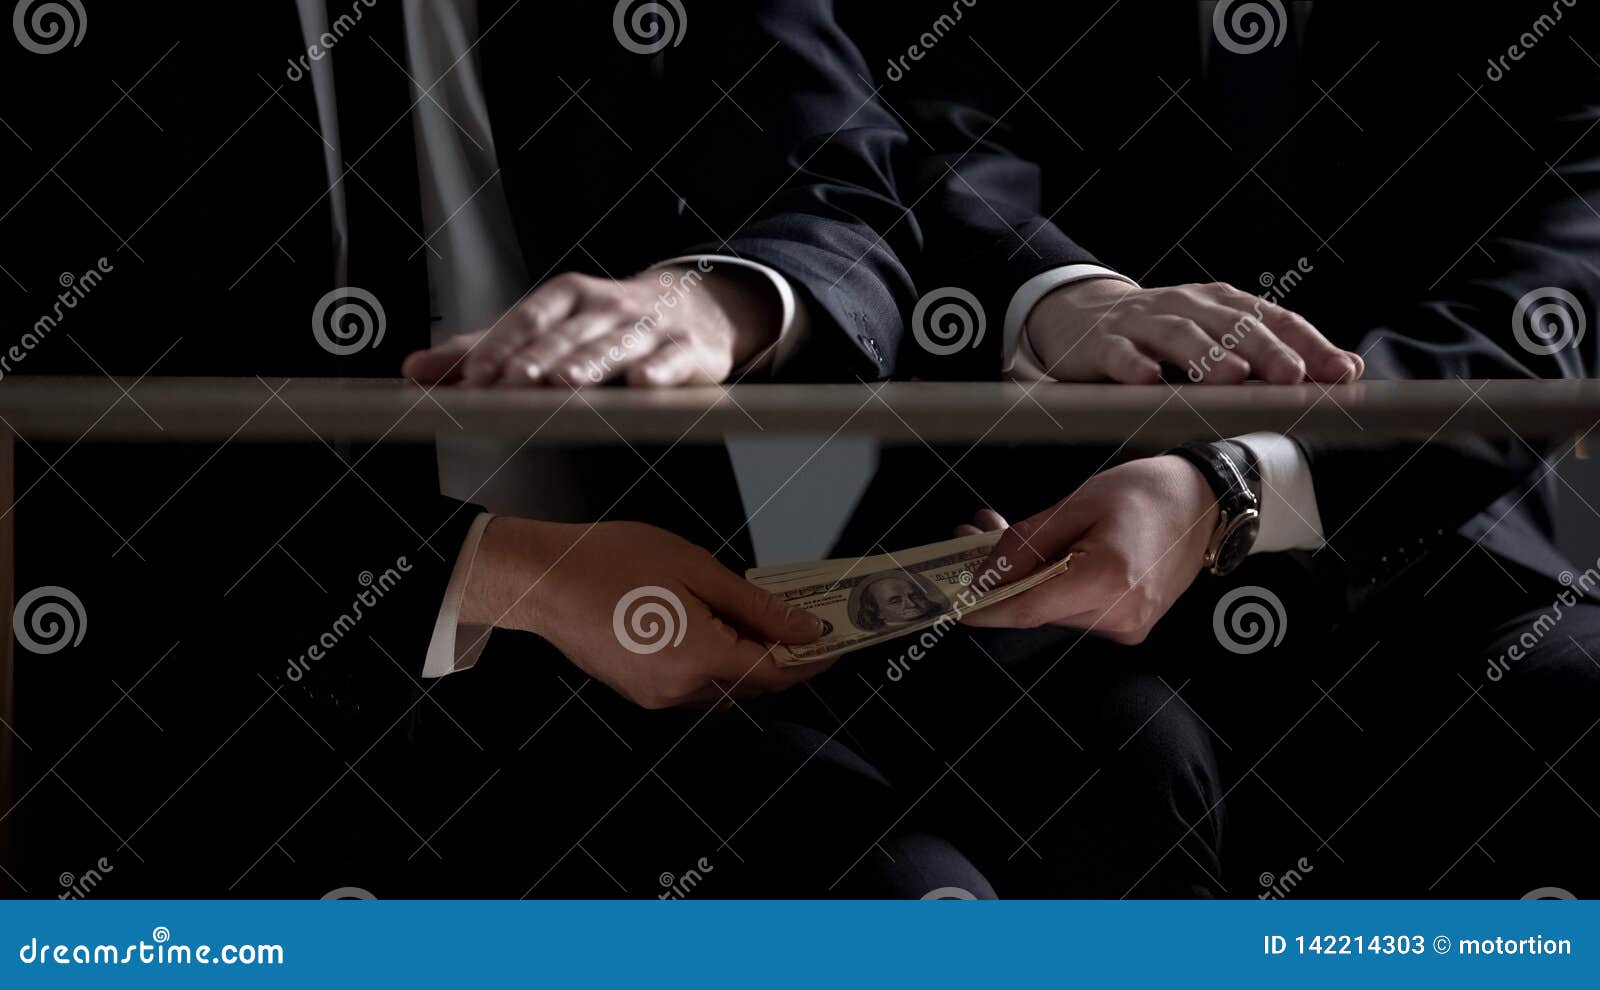 politician hands taking bribe money under office table, lobbying of interests